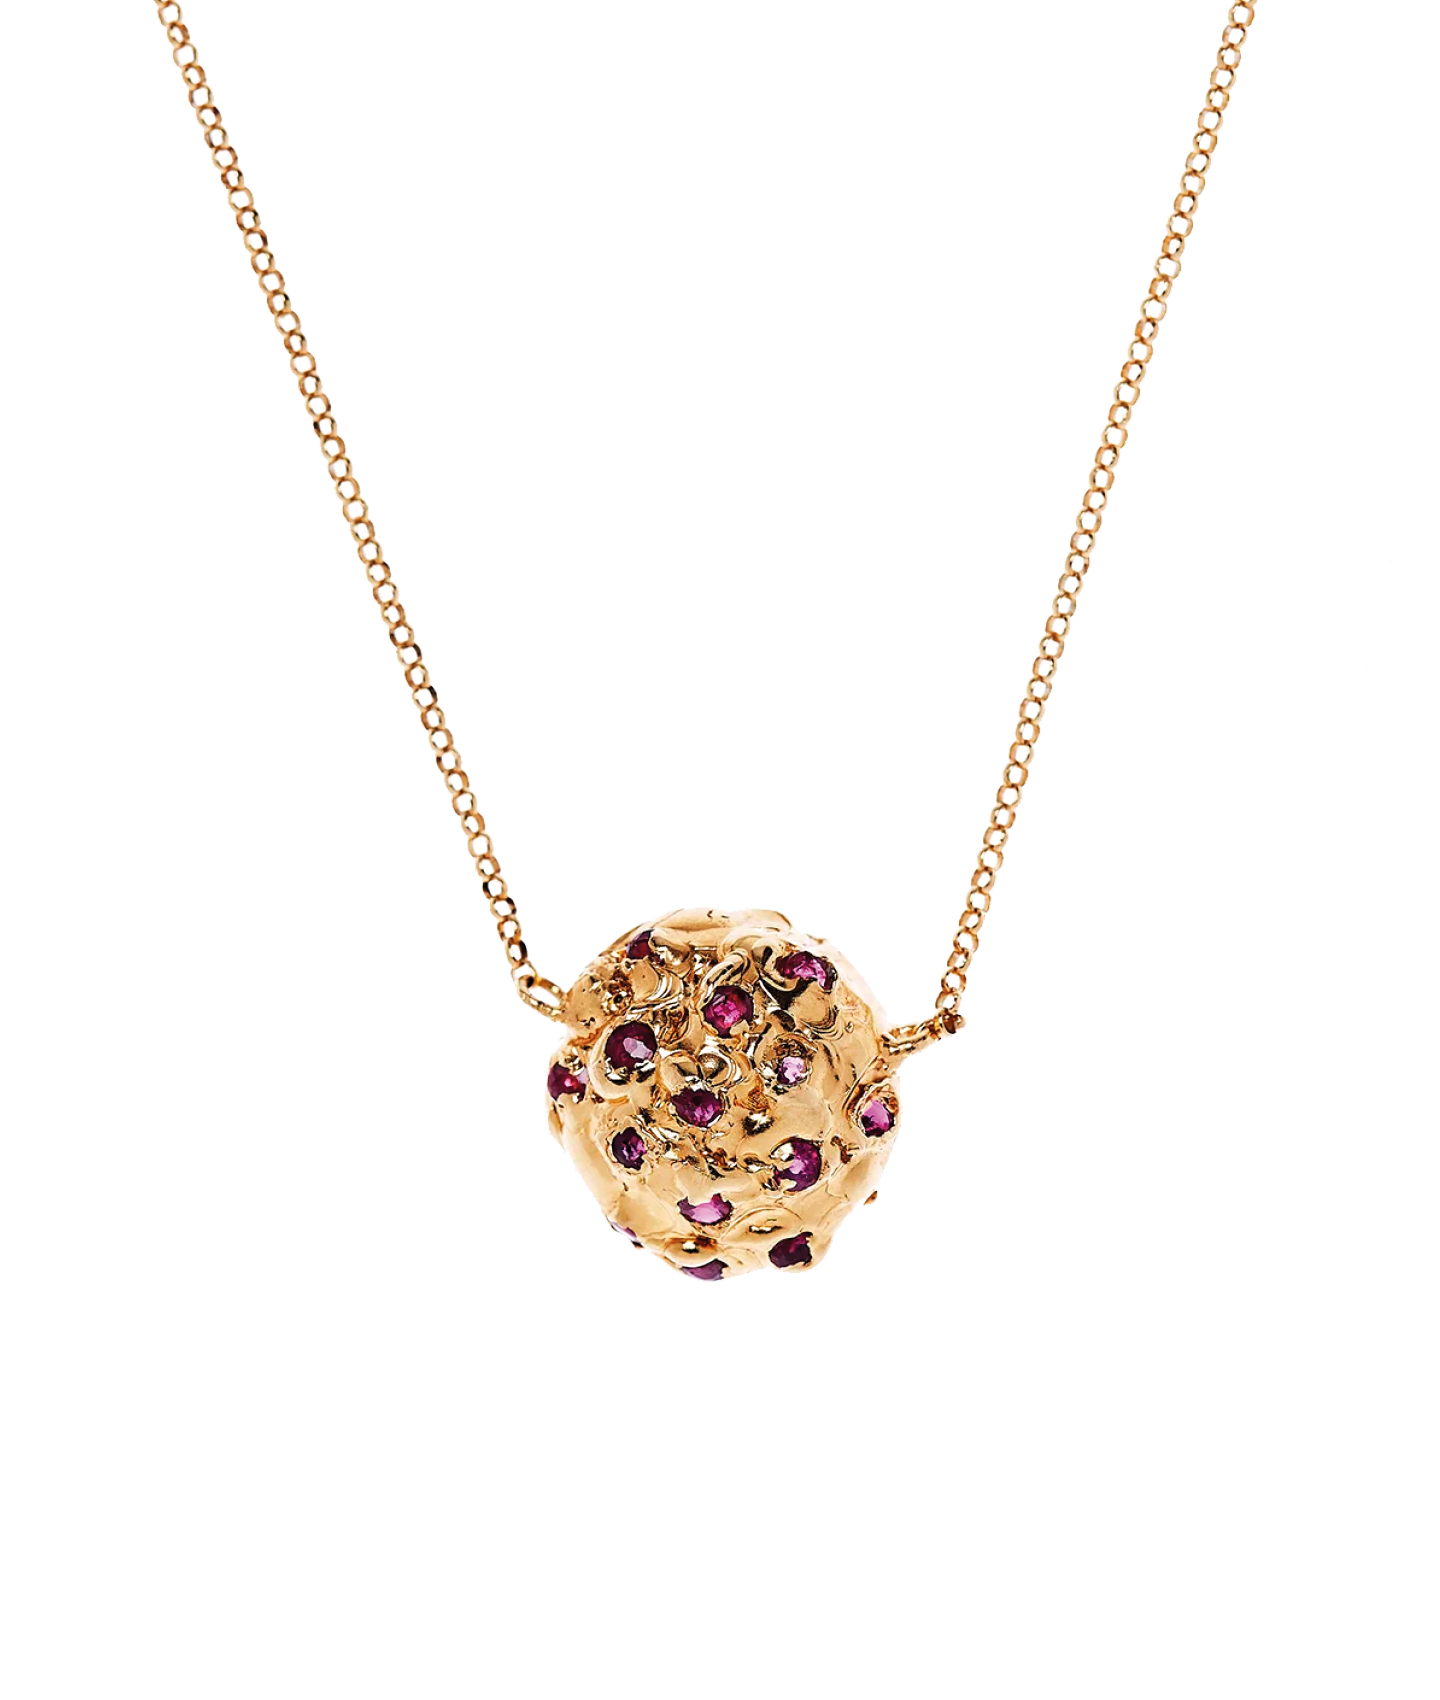 The Inferno Ruby Dome Necklace